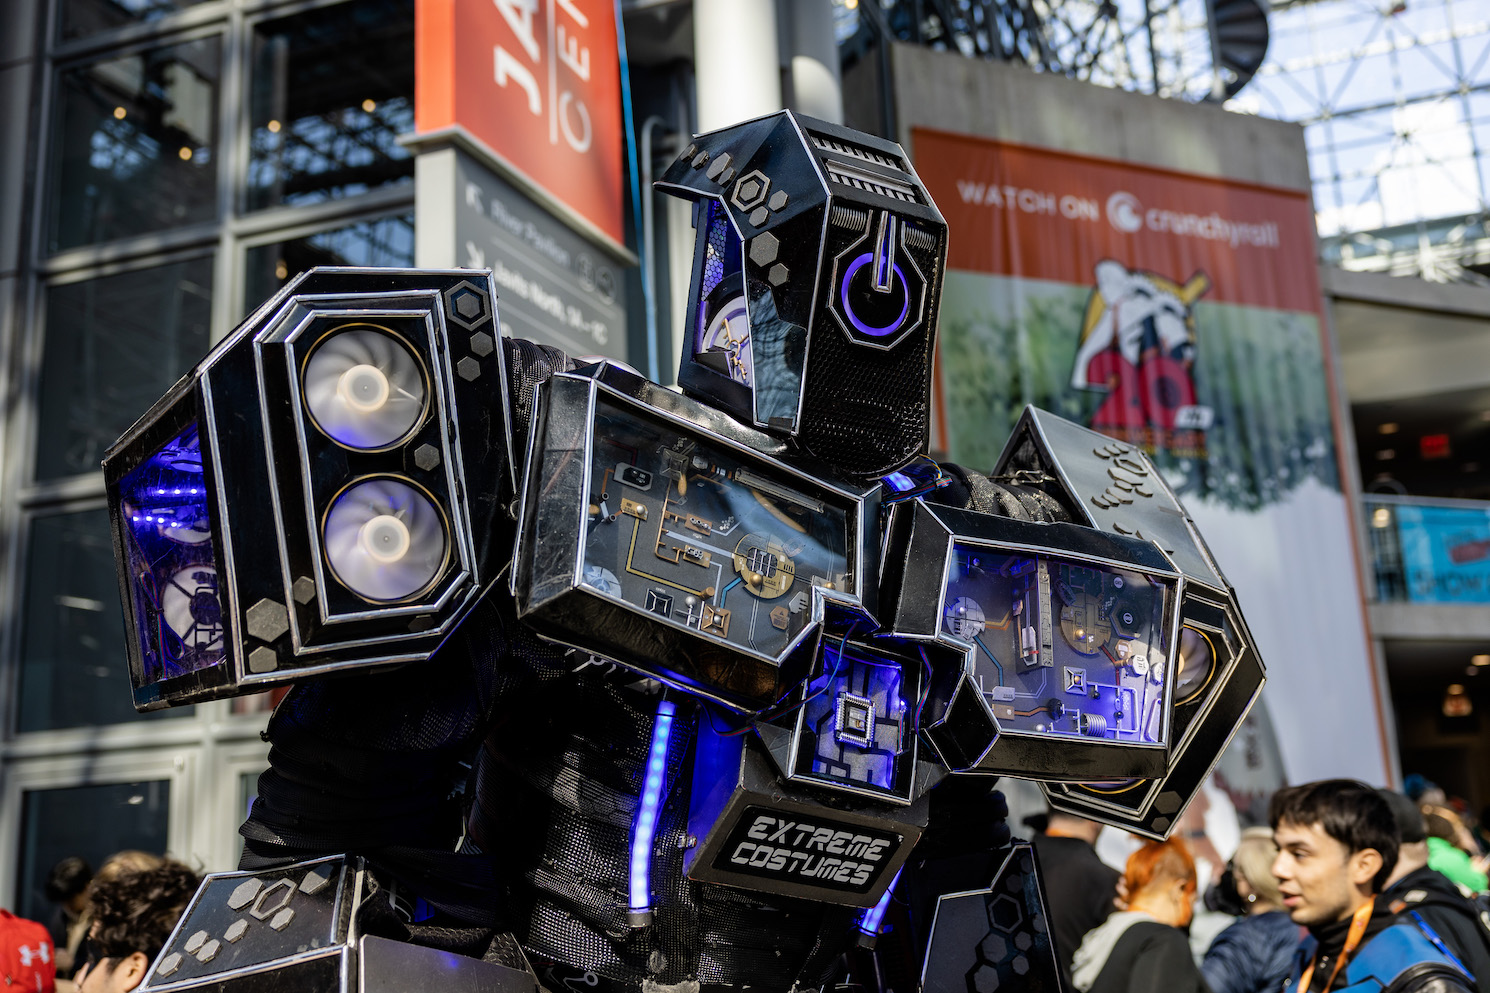 A cosplayer wears a black-and-purple robot costume accented with purple designs that look like wires and buttons. The text on the center of the outfit reads “EXTREME COSTUME.”